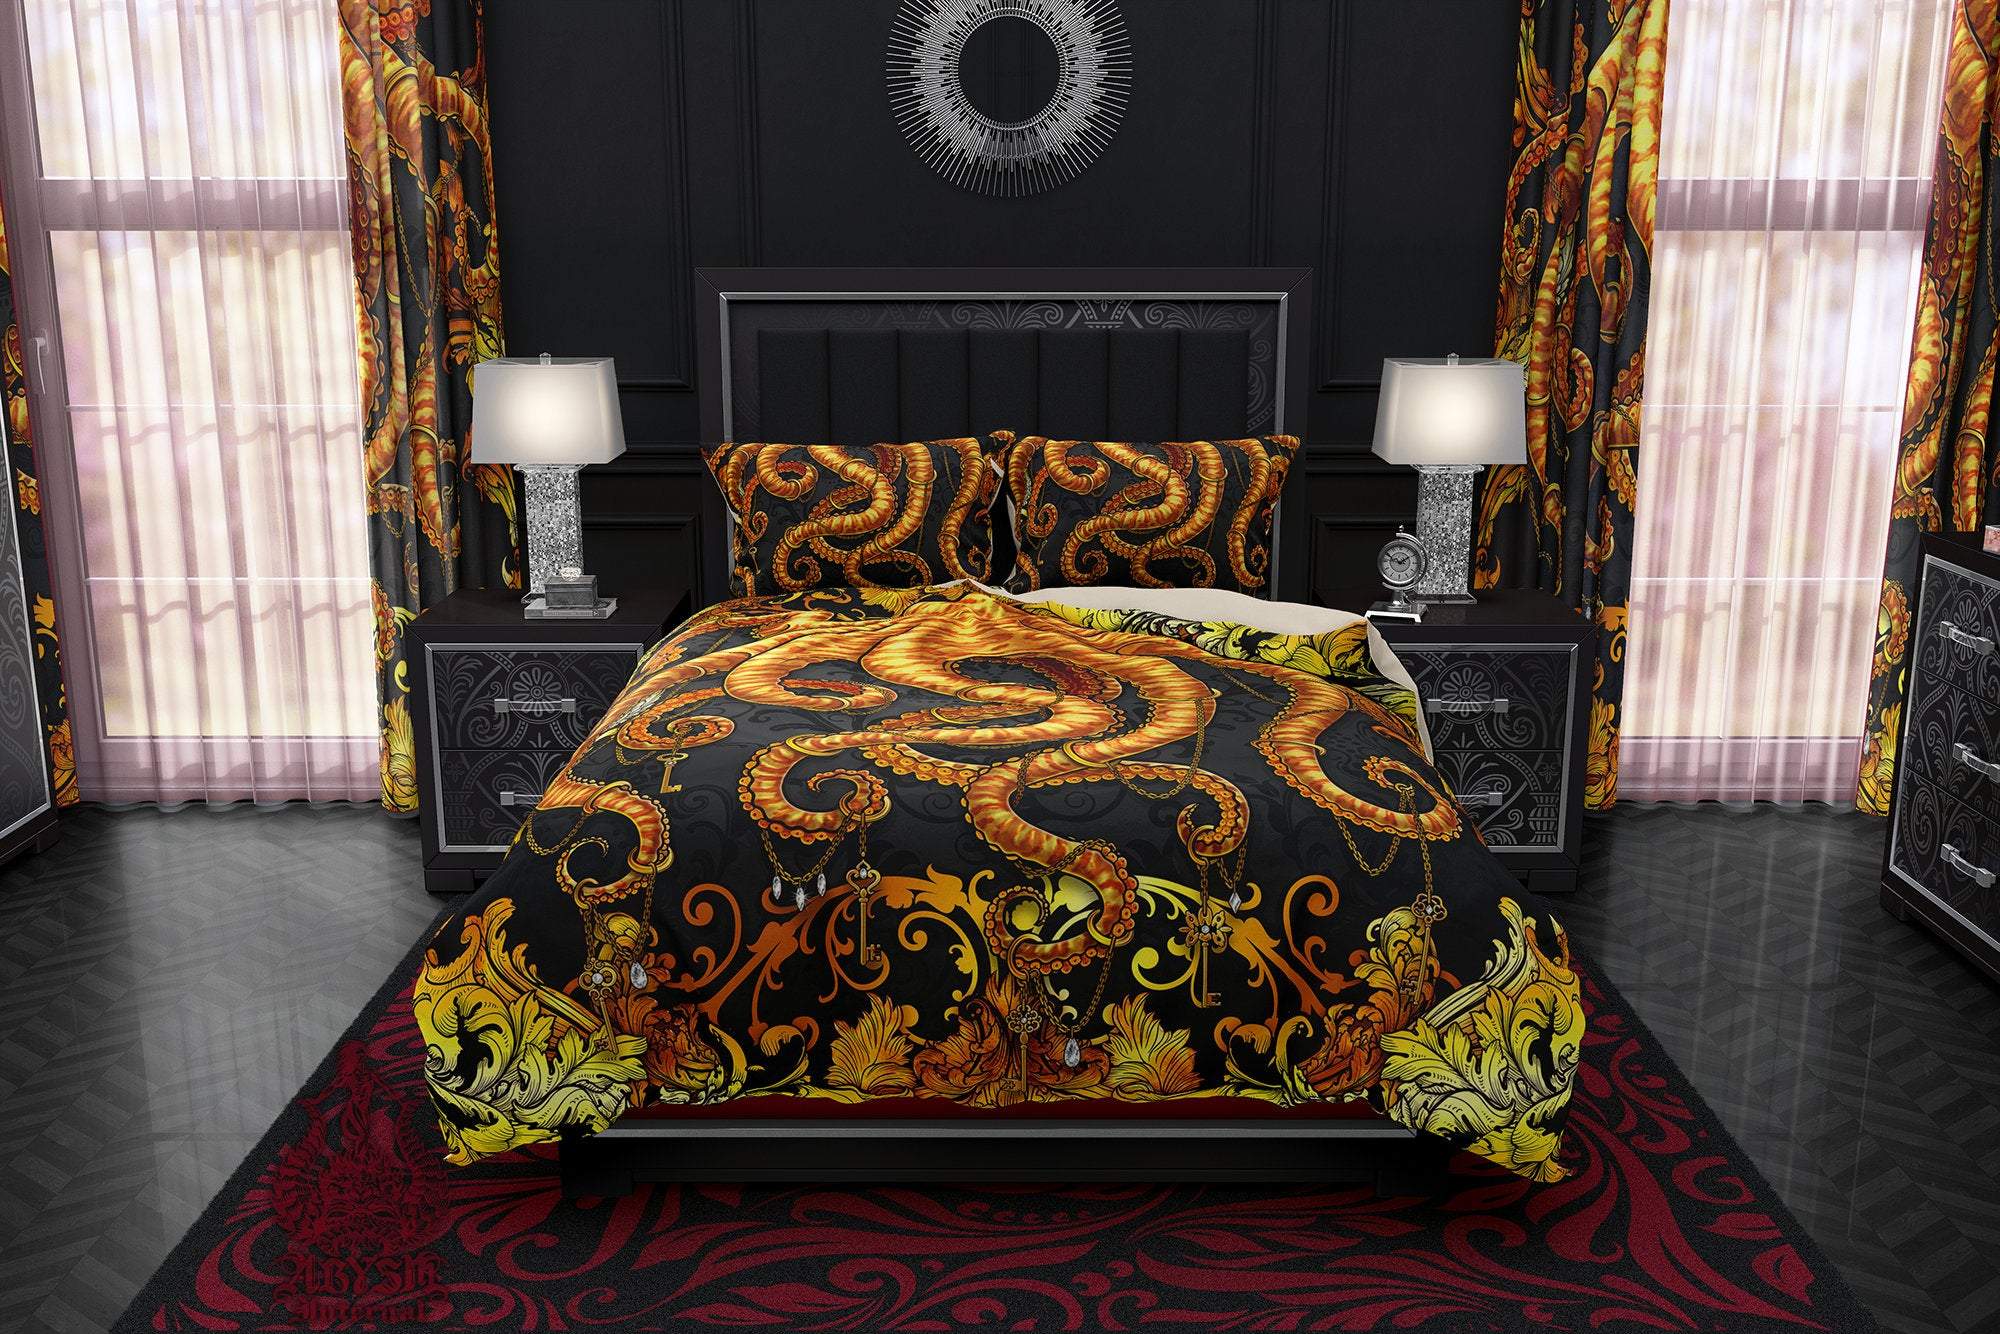 Octopus Bedding Set, Comforter and Duvet, Alternative Bed Cover and Beach Bedroom Decor, King, Queen and Twin Size - Gold and Black - Abysm Internal